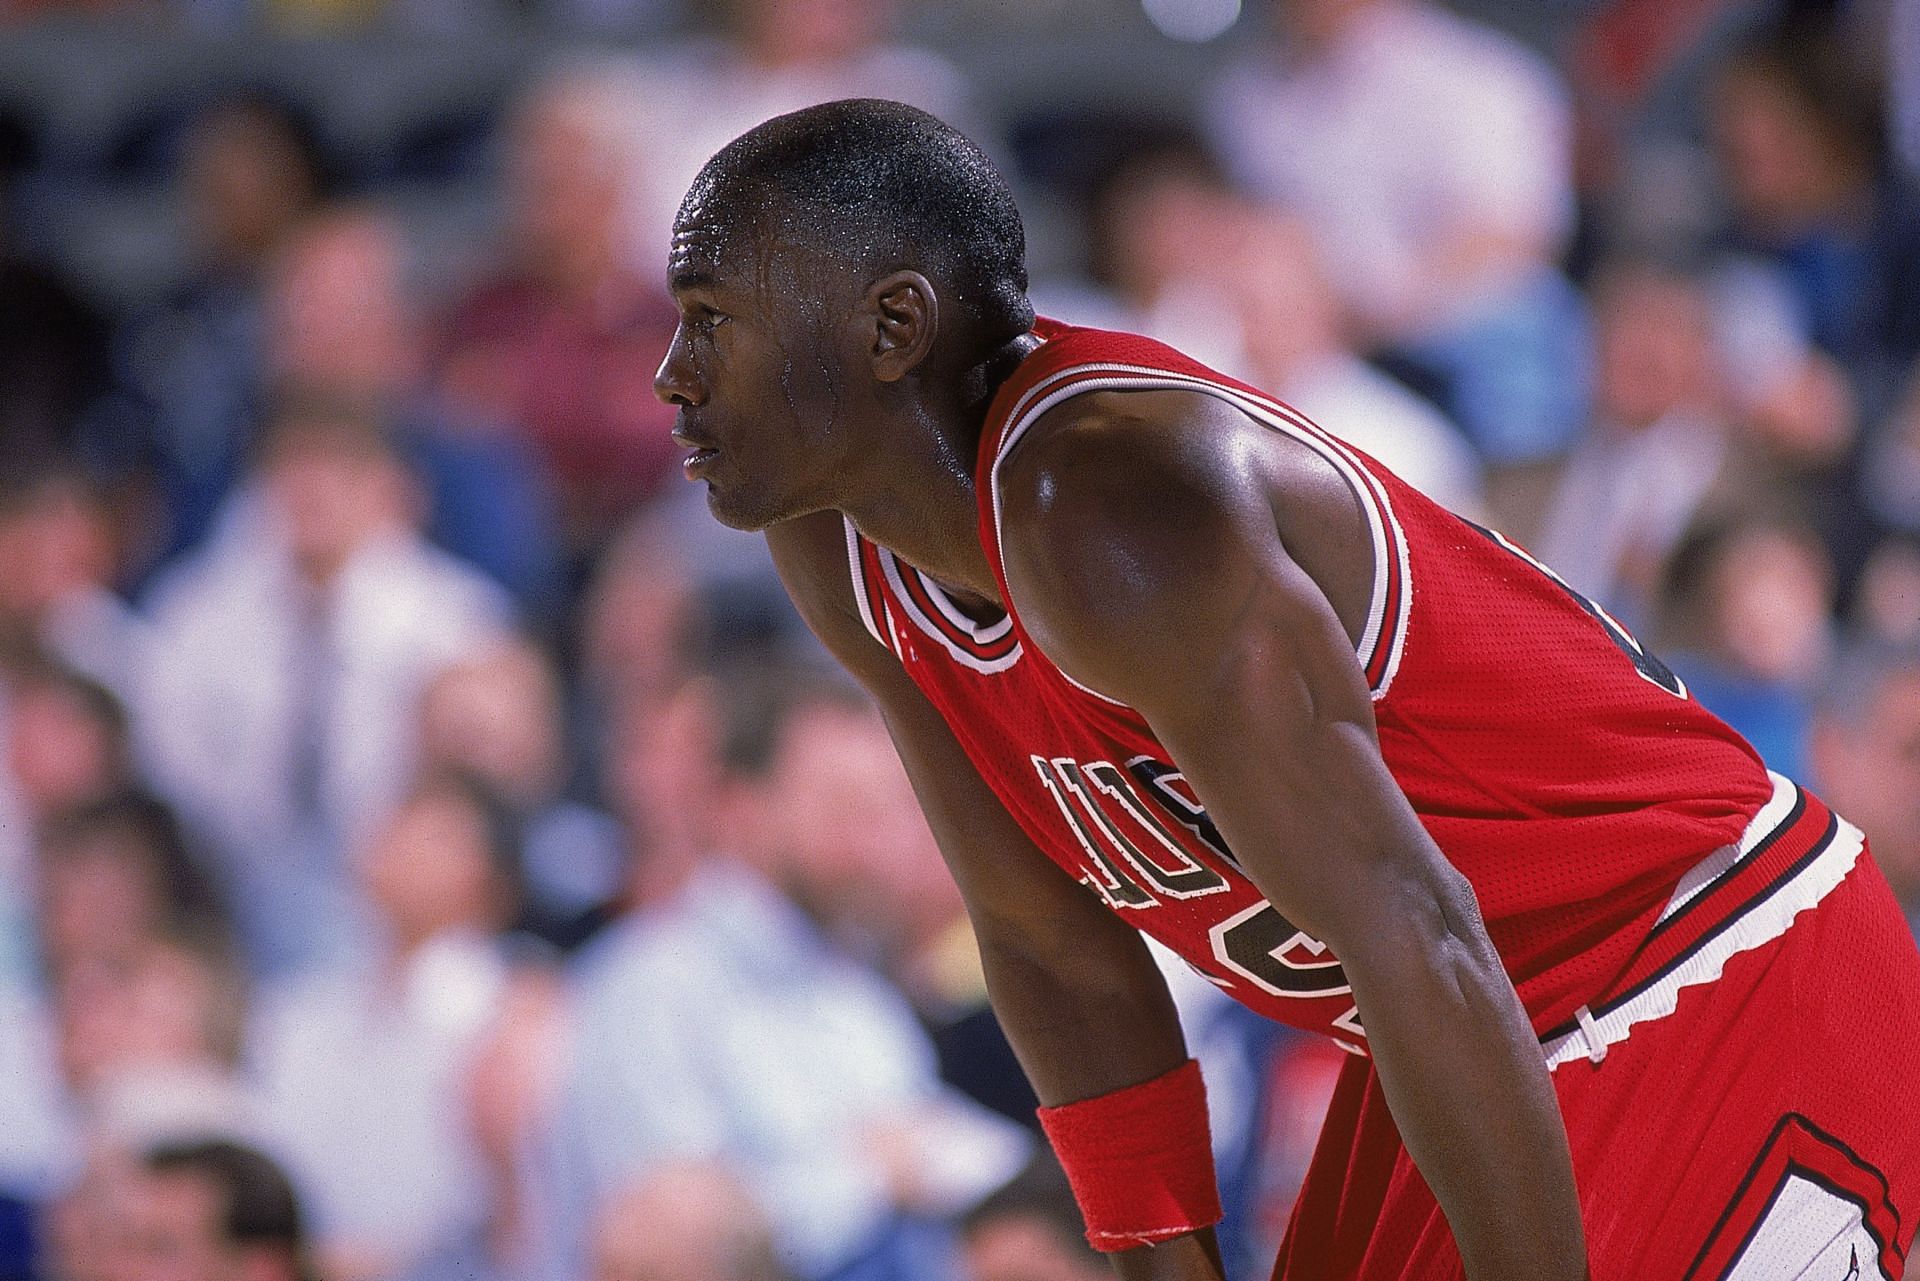 Michael Jordan is considered the greatest basketball player of all time.